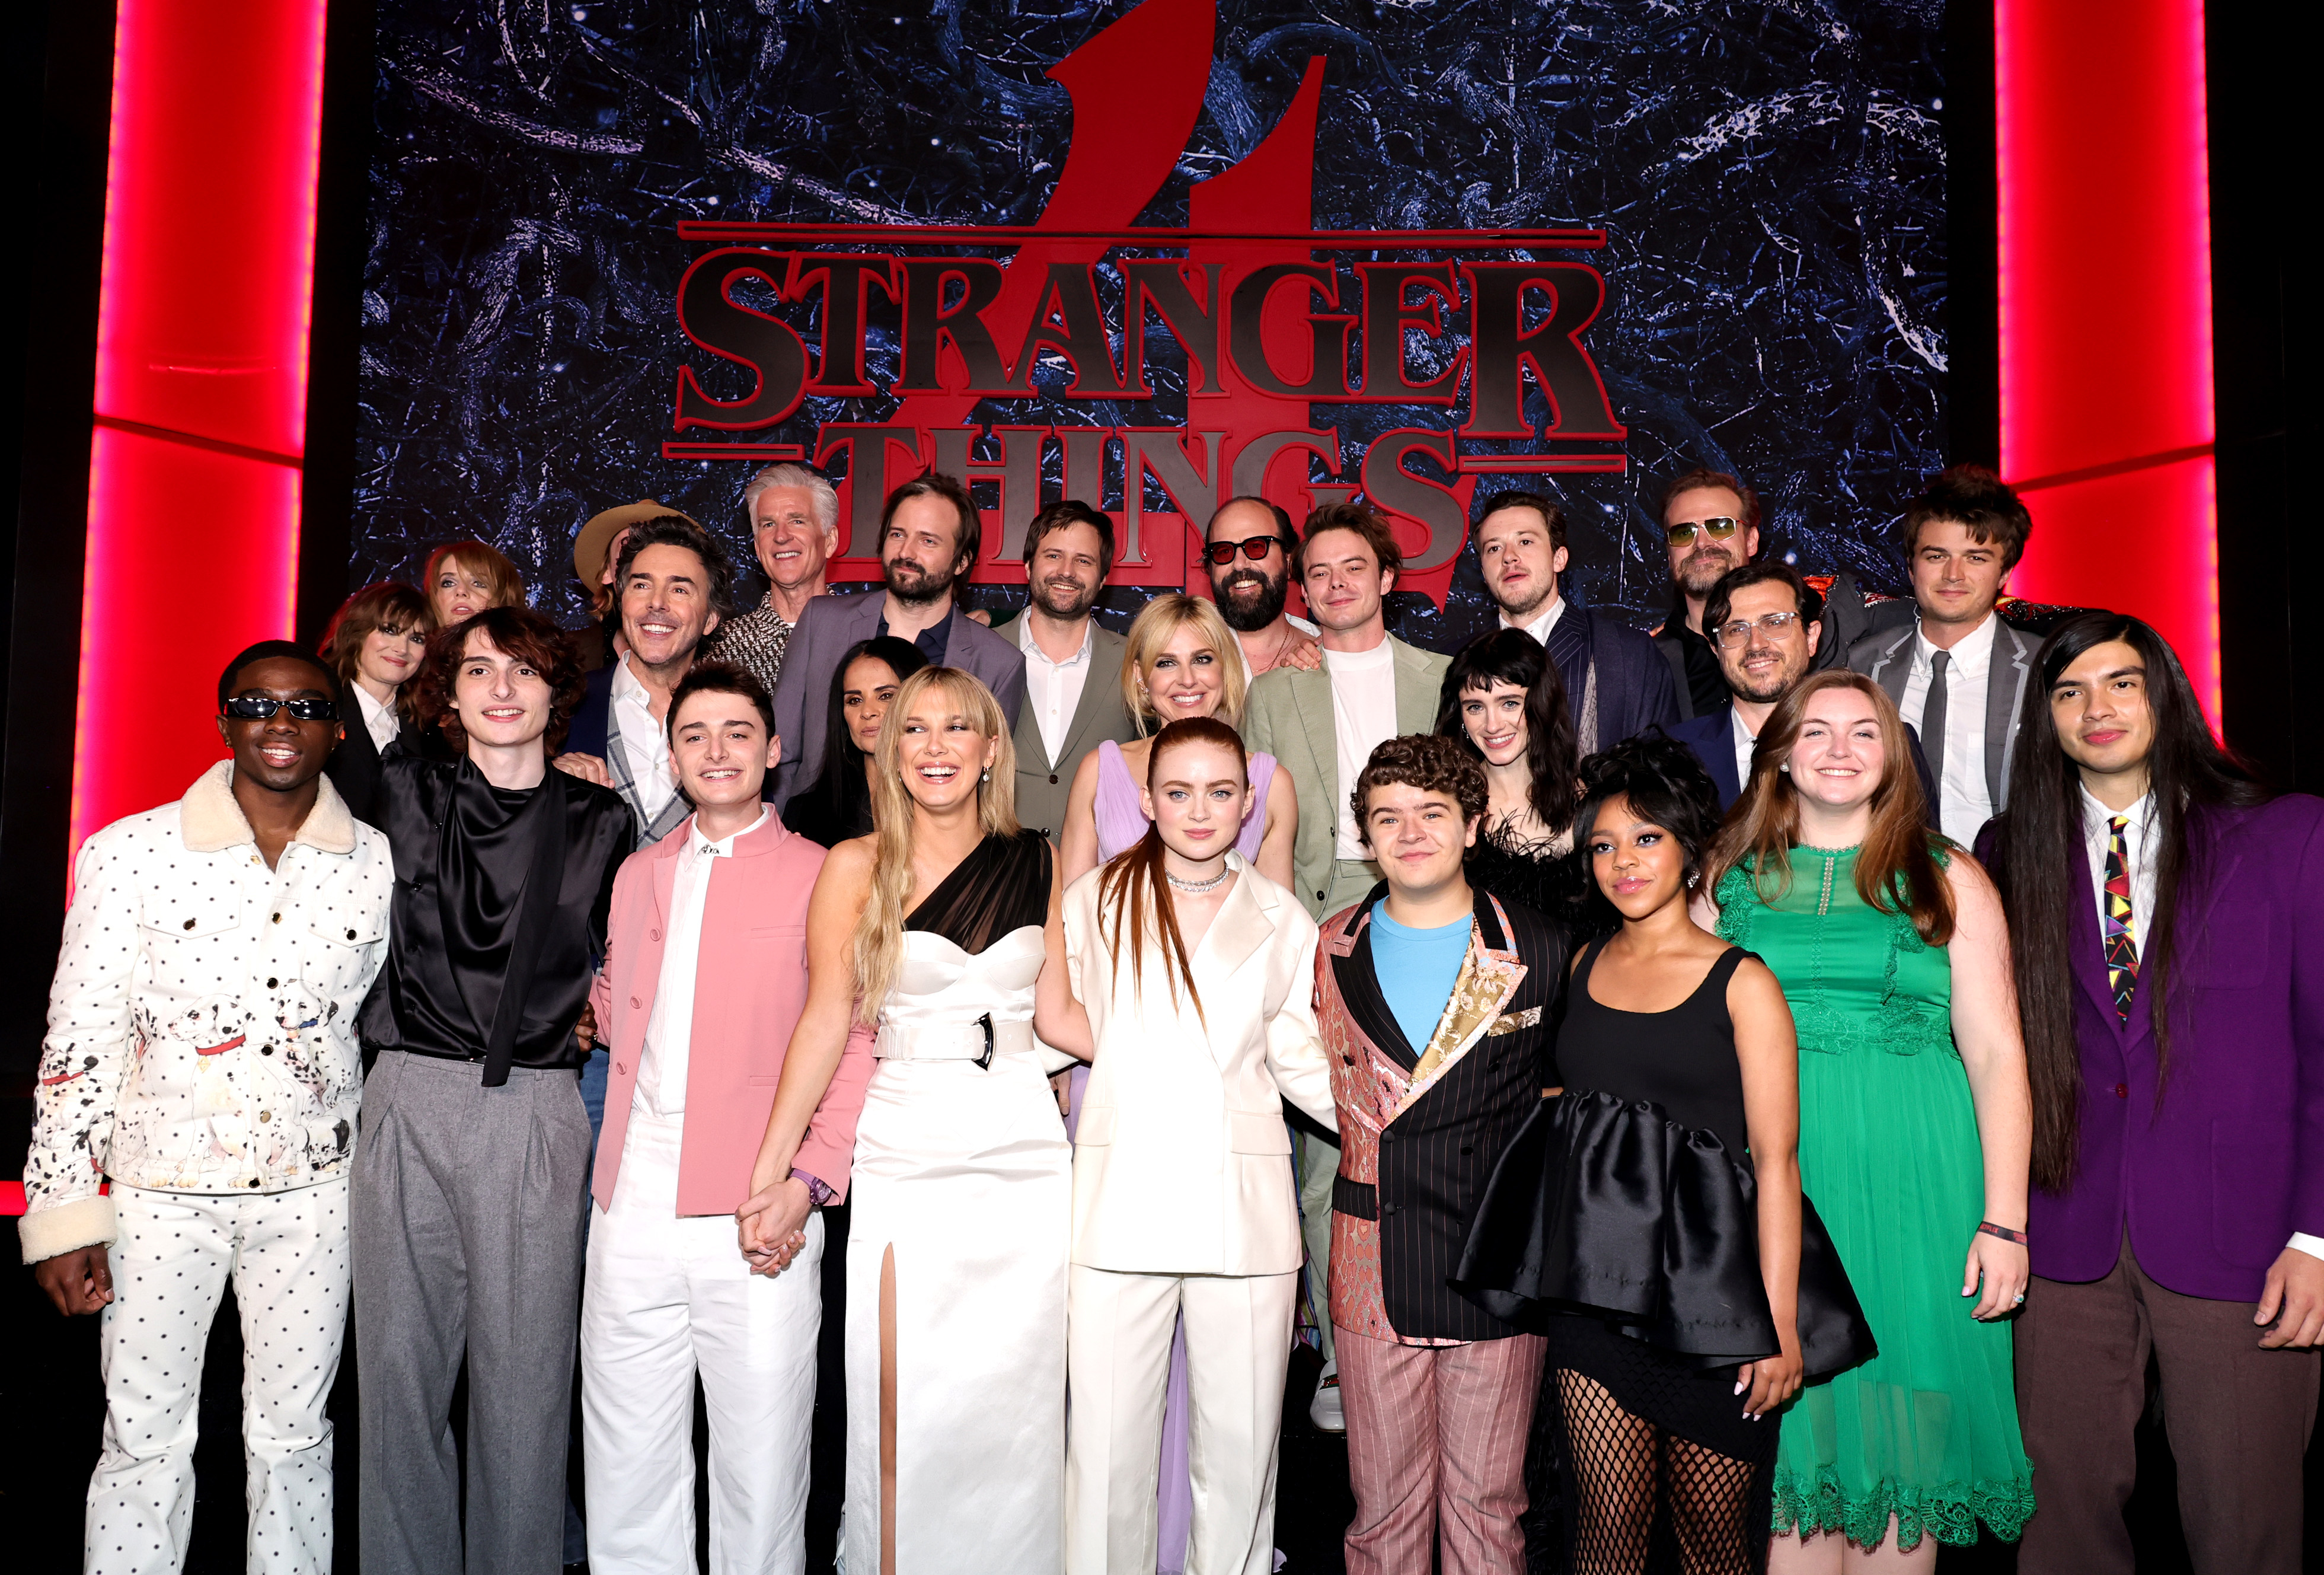 Group of &quot;Stranger Things&quot; cast members standing together in an event, dressed in formal attire